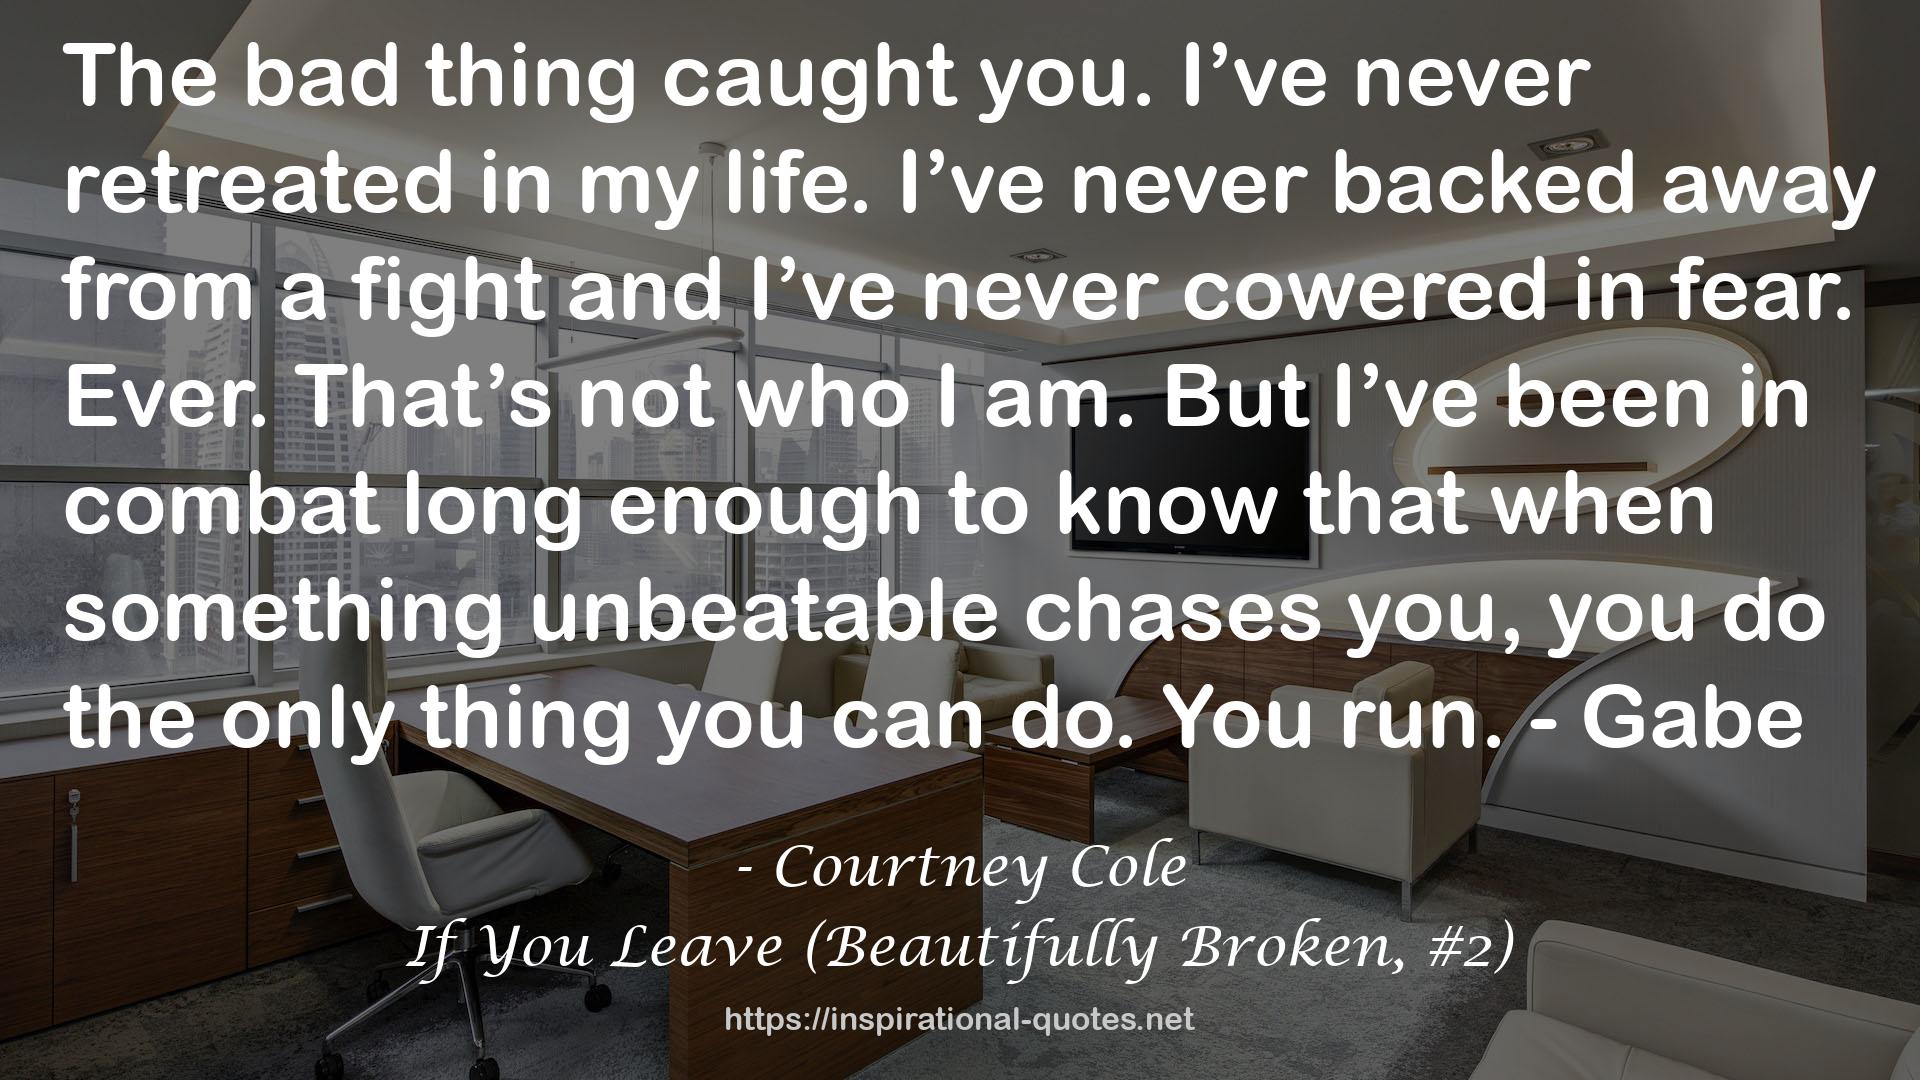 If You Leave (Beautifully Broken, #2) QUOTES